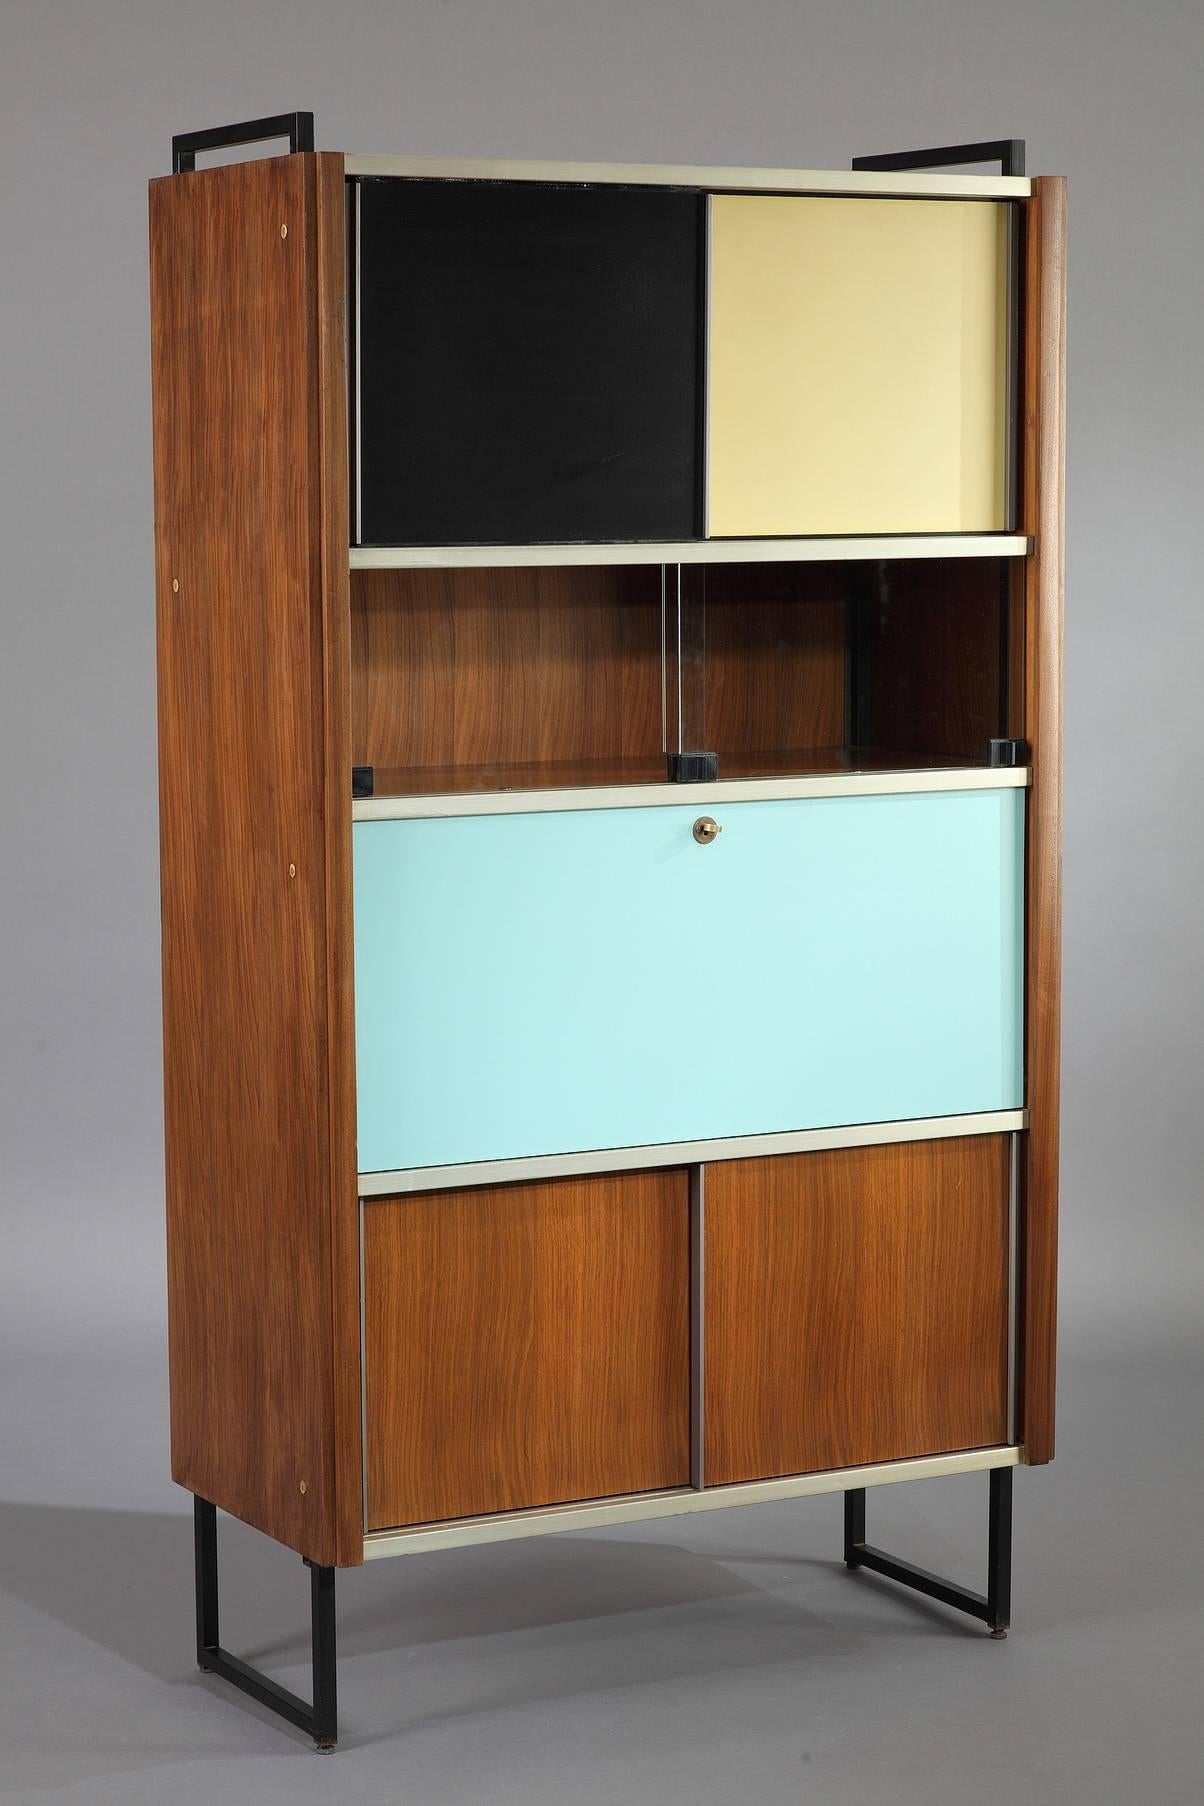 EFA secretaire bookcase in rosewood, aluminium and black laquered metal by Georges Frydman. It is composed of two containers and a s shelve with sliding doors in wood and glass. One container with a flap with a small drawer and several storage